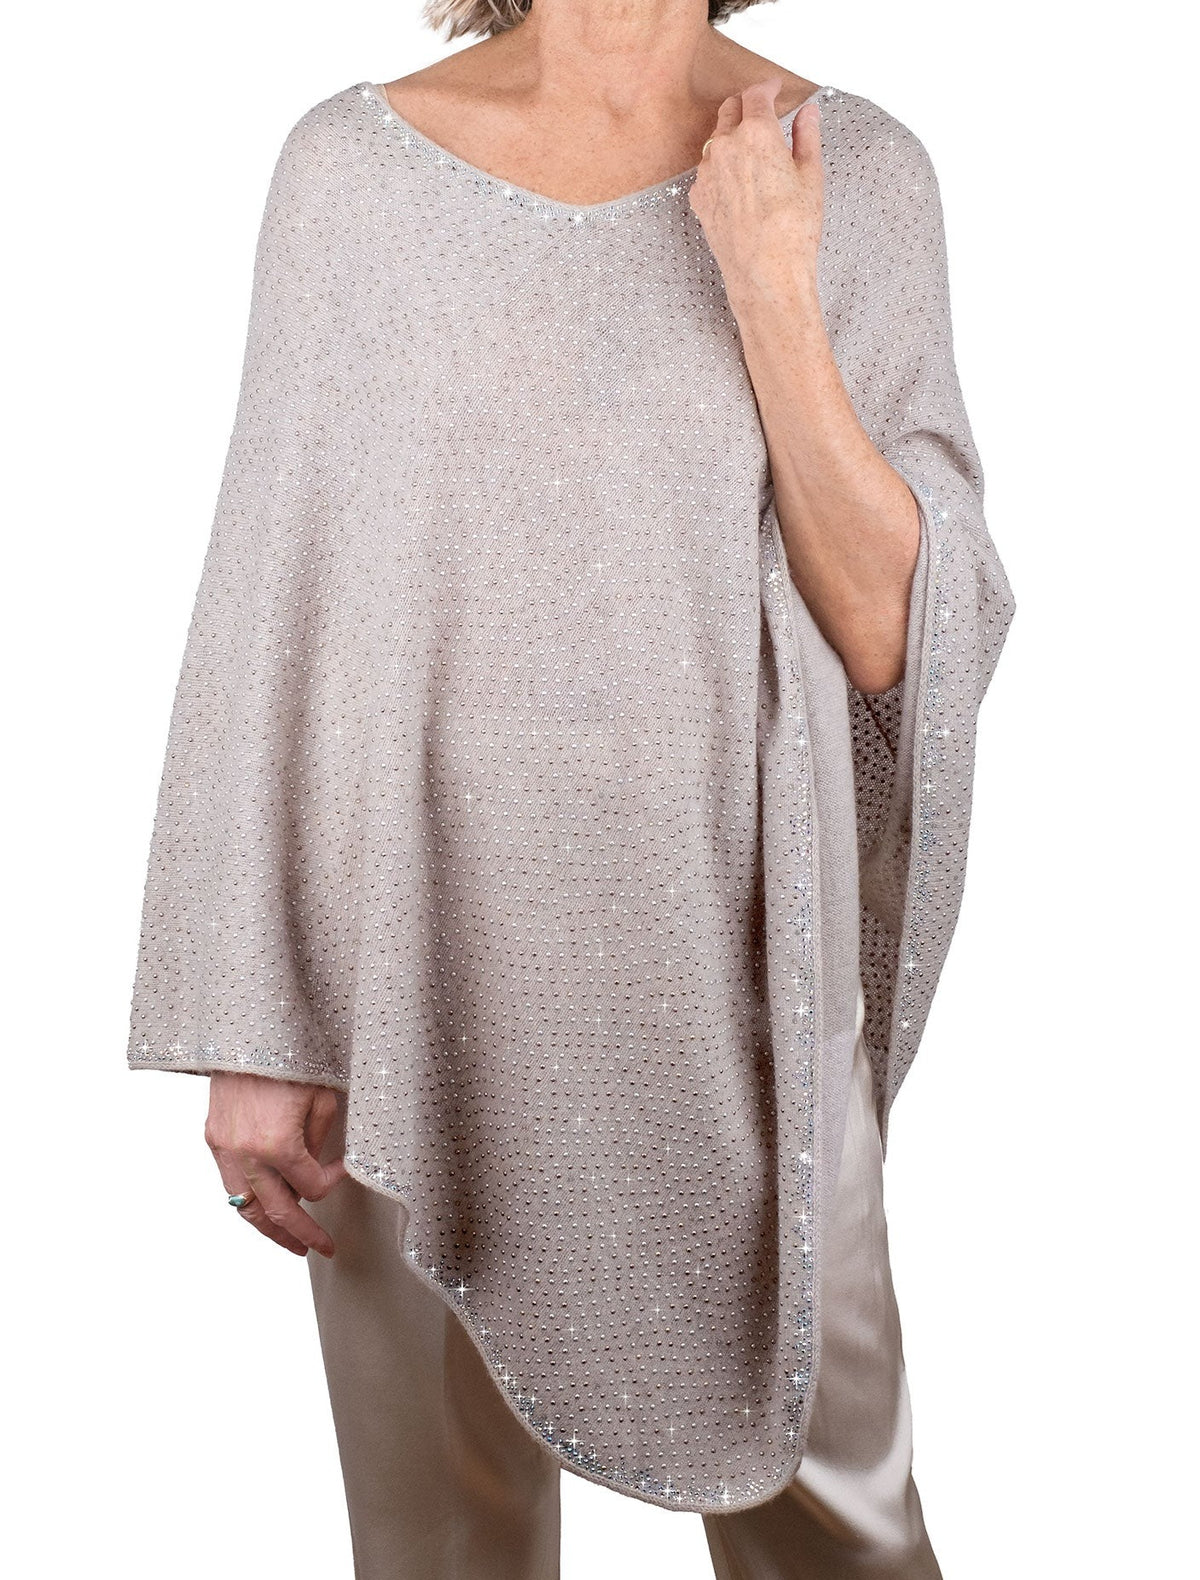 'Stone' Tissue Weight Assuit Poncho- size L